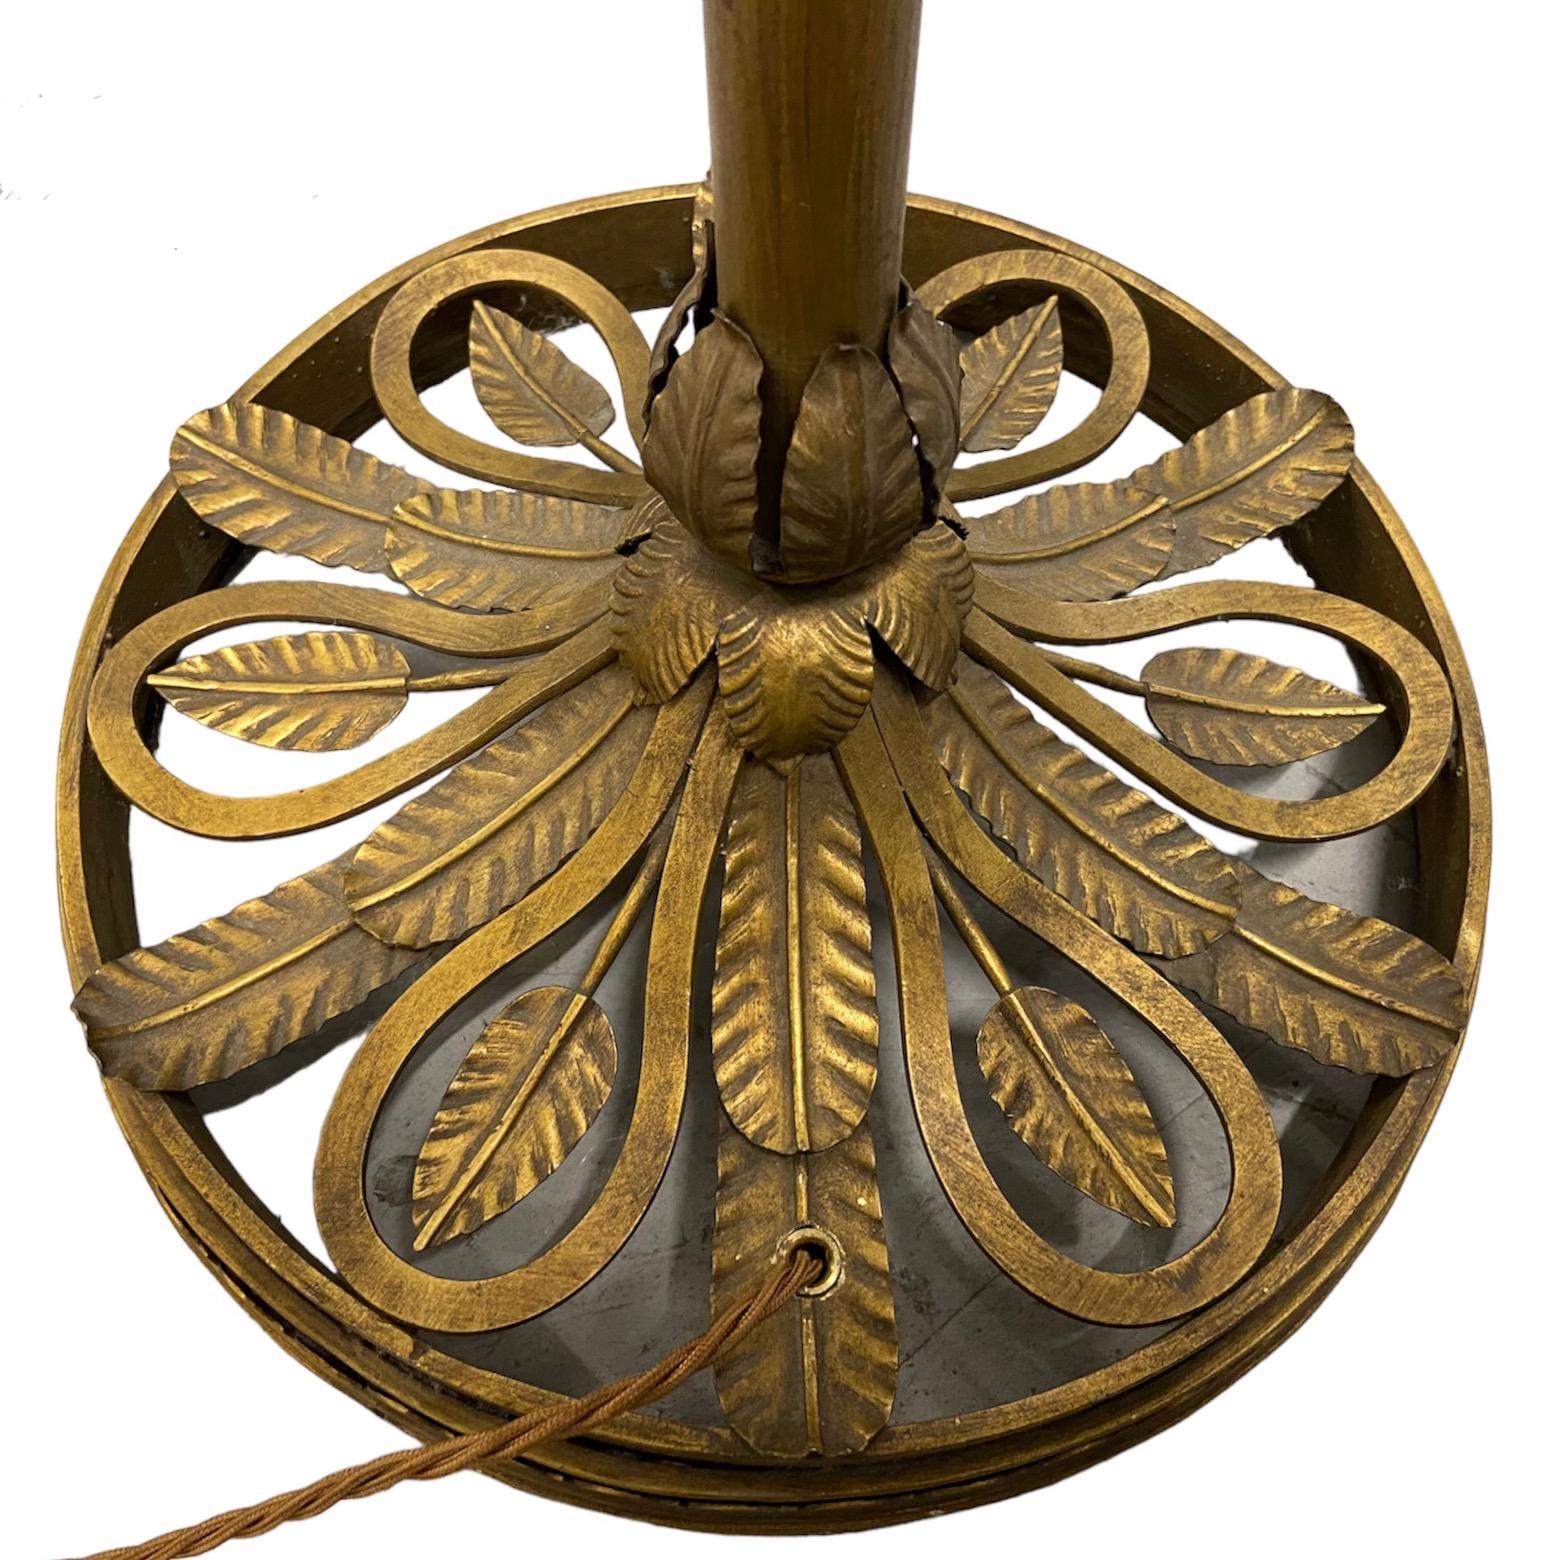 A balancing  brass and glass ornate, elegant and unusual floor lamp from around 1920's to 1950's. The crowned glass sphere hangs from the vertical tige by a brass branch.